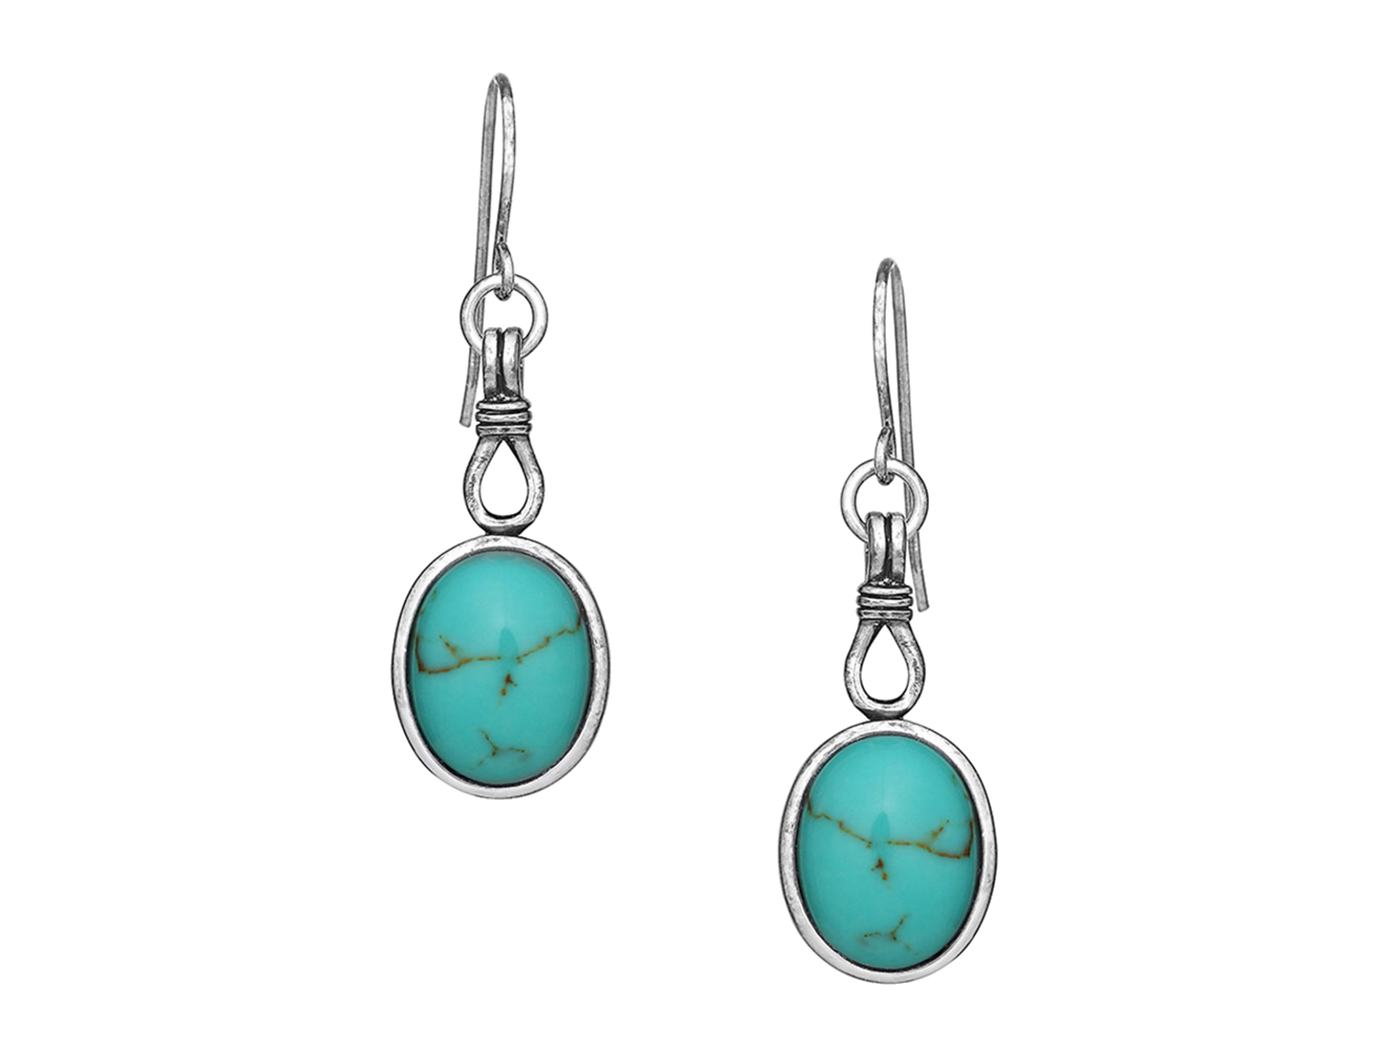 Turquoise oval earrings that are held together with a silver rope detail. They dangle from your ear on hypoallergenic French stainless steel hooks. Rhodium over a brass base. Stainless steel French wires. Turquoise. Available online or at our shop just outside Nashville in Smyrna, TN. 